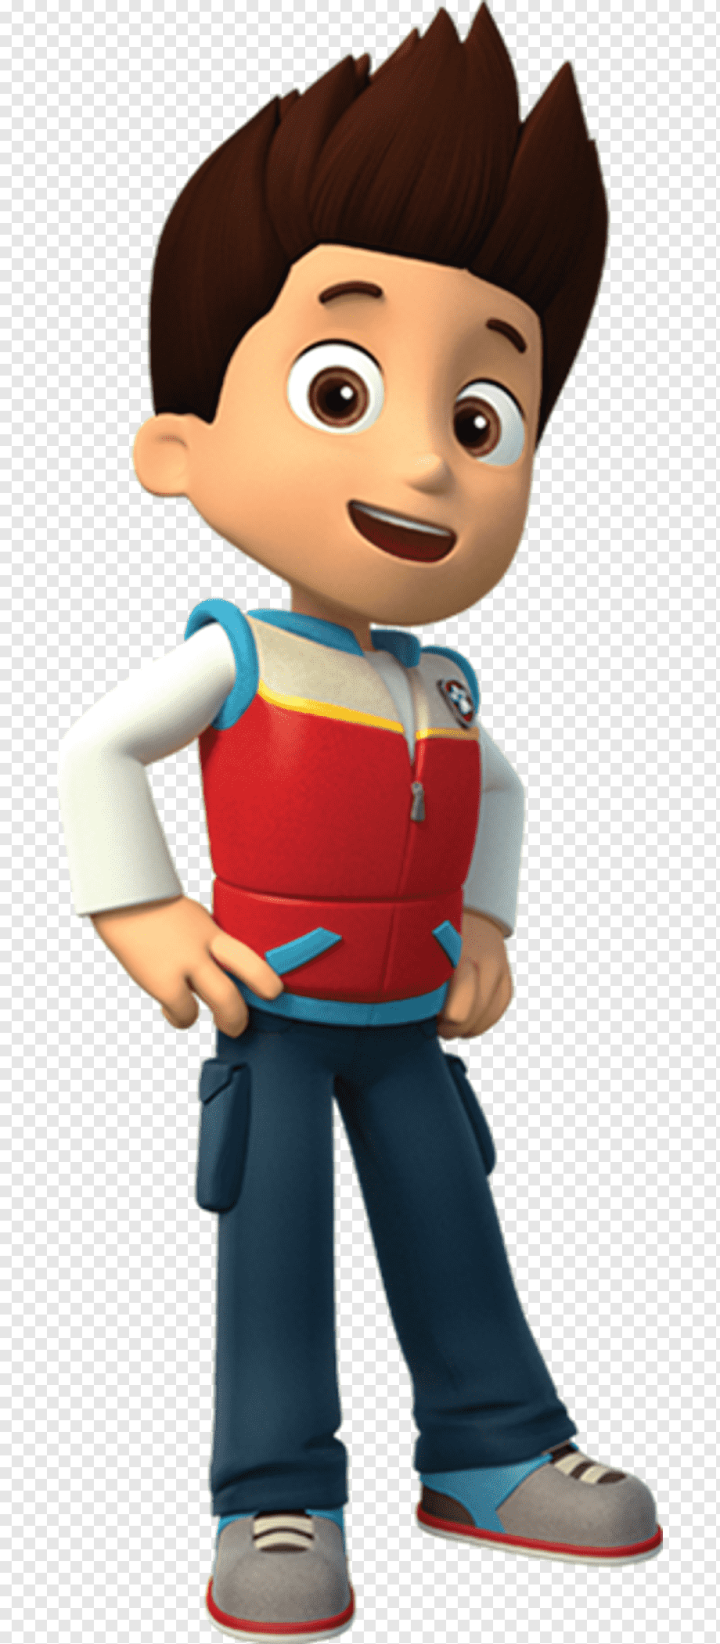 child,animals,boy,cartoon,fictional Character,bbc,police,action Figure,standing,patrol,nickelodeon,mascot,figurine,capn Turbot,television Show,PAW Patrol,Puppy,Cap'n Turbot,Dog,png,transparent,free download,png